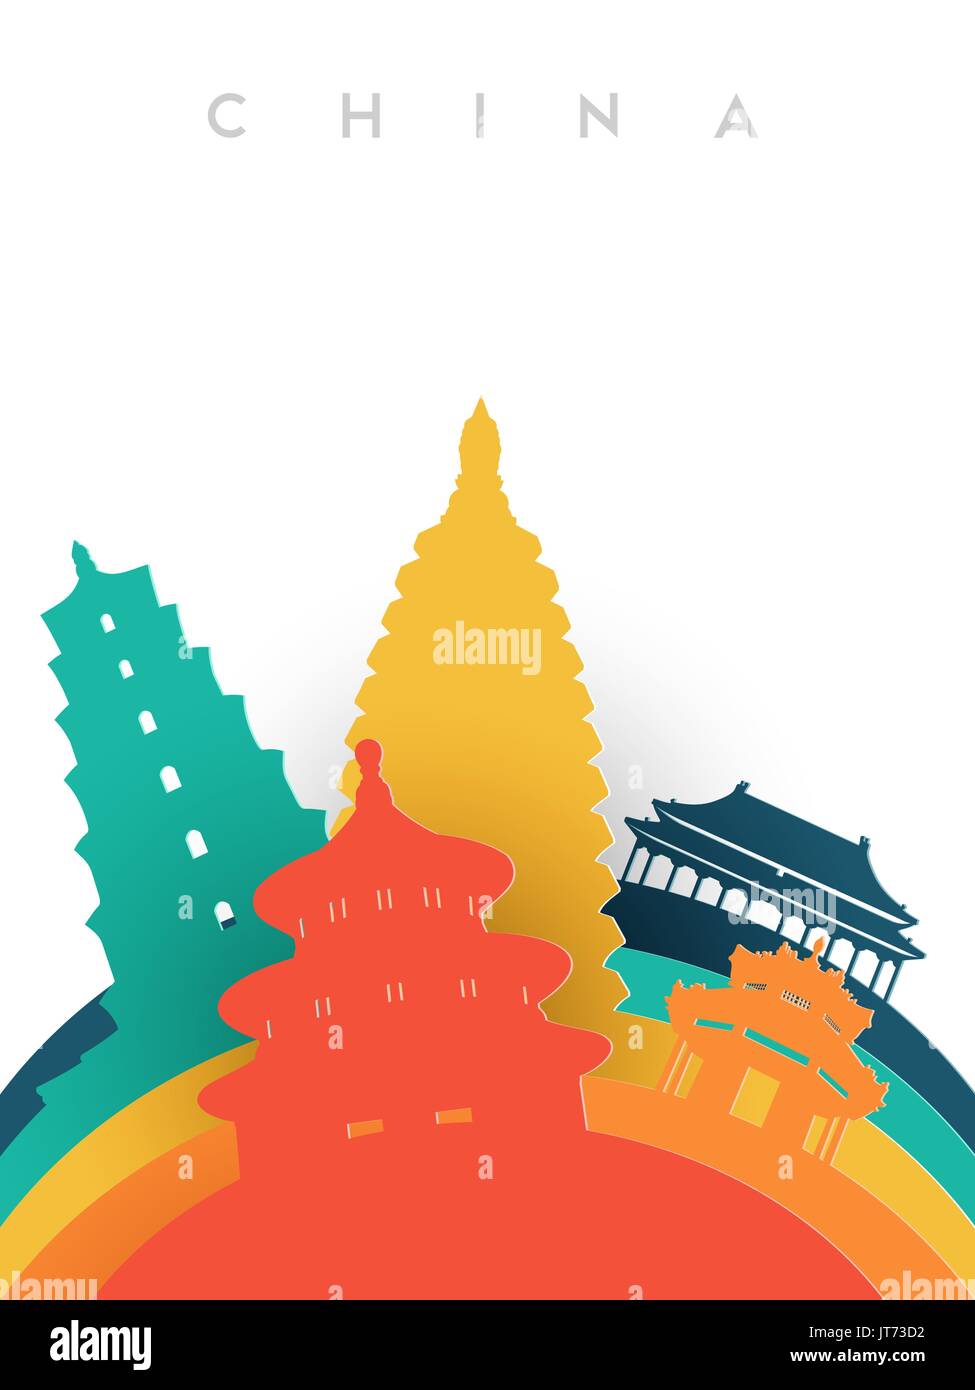 Travel China illustration in 3d paper cut style, Chinese world landmarks. Includes forbidden city, heaven temple, ancient pagodas. EPS10 vector. Stock Vector